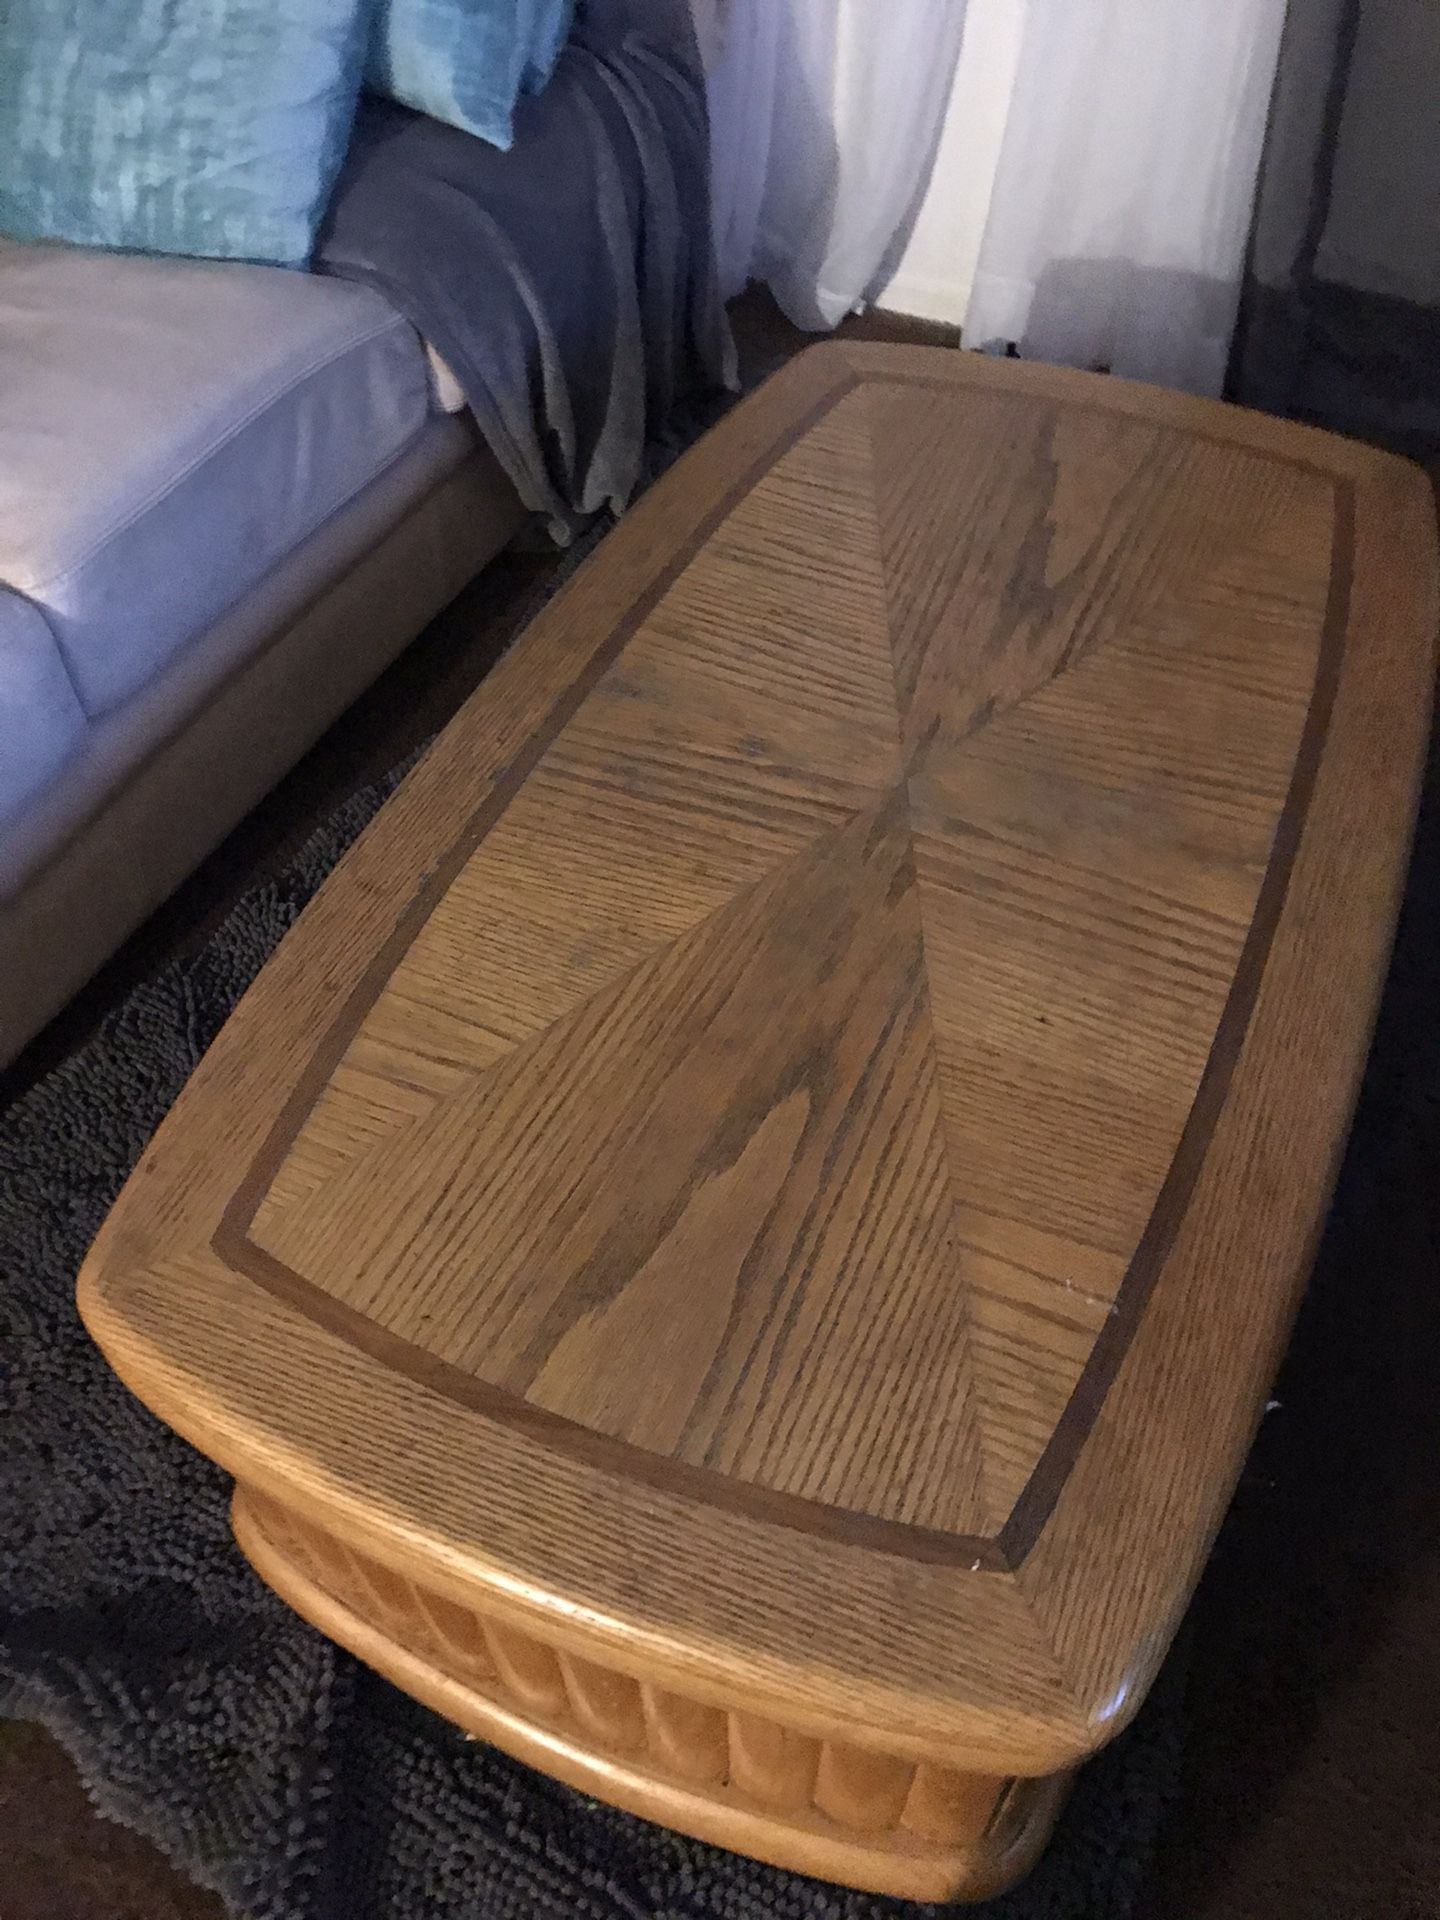 2 end tables and coffee table...real wood